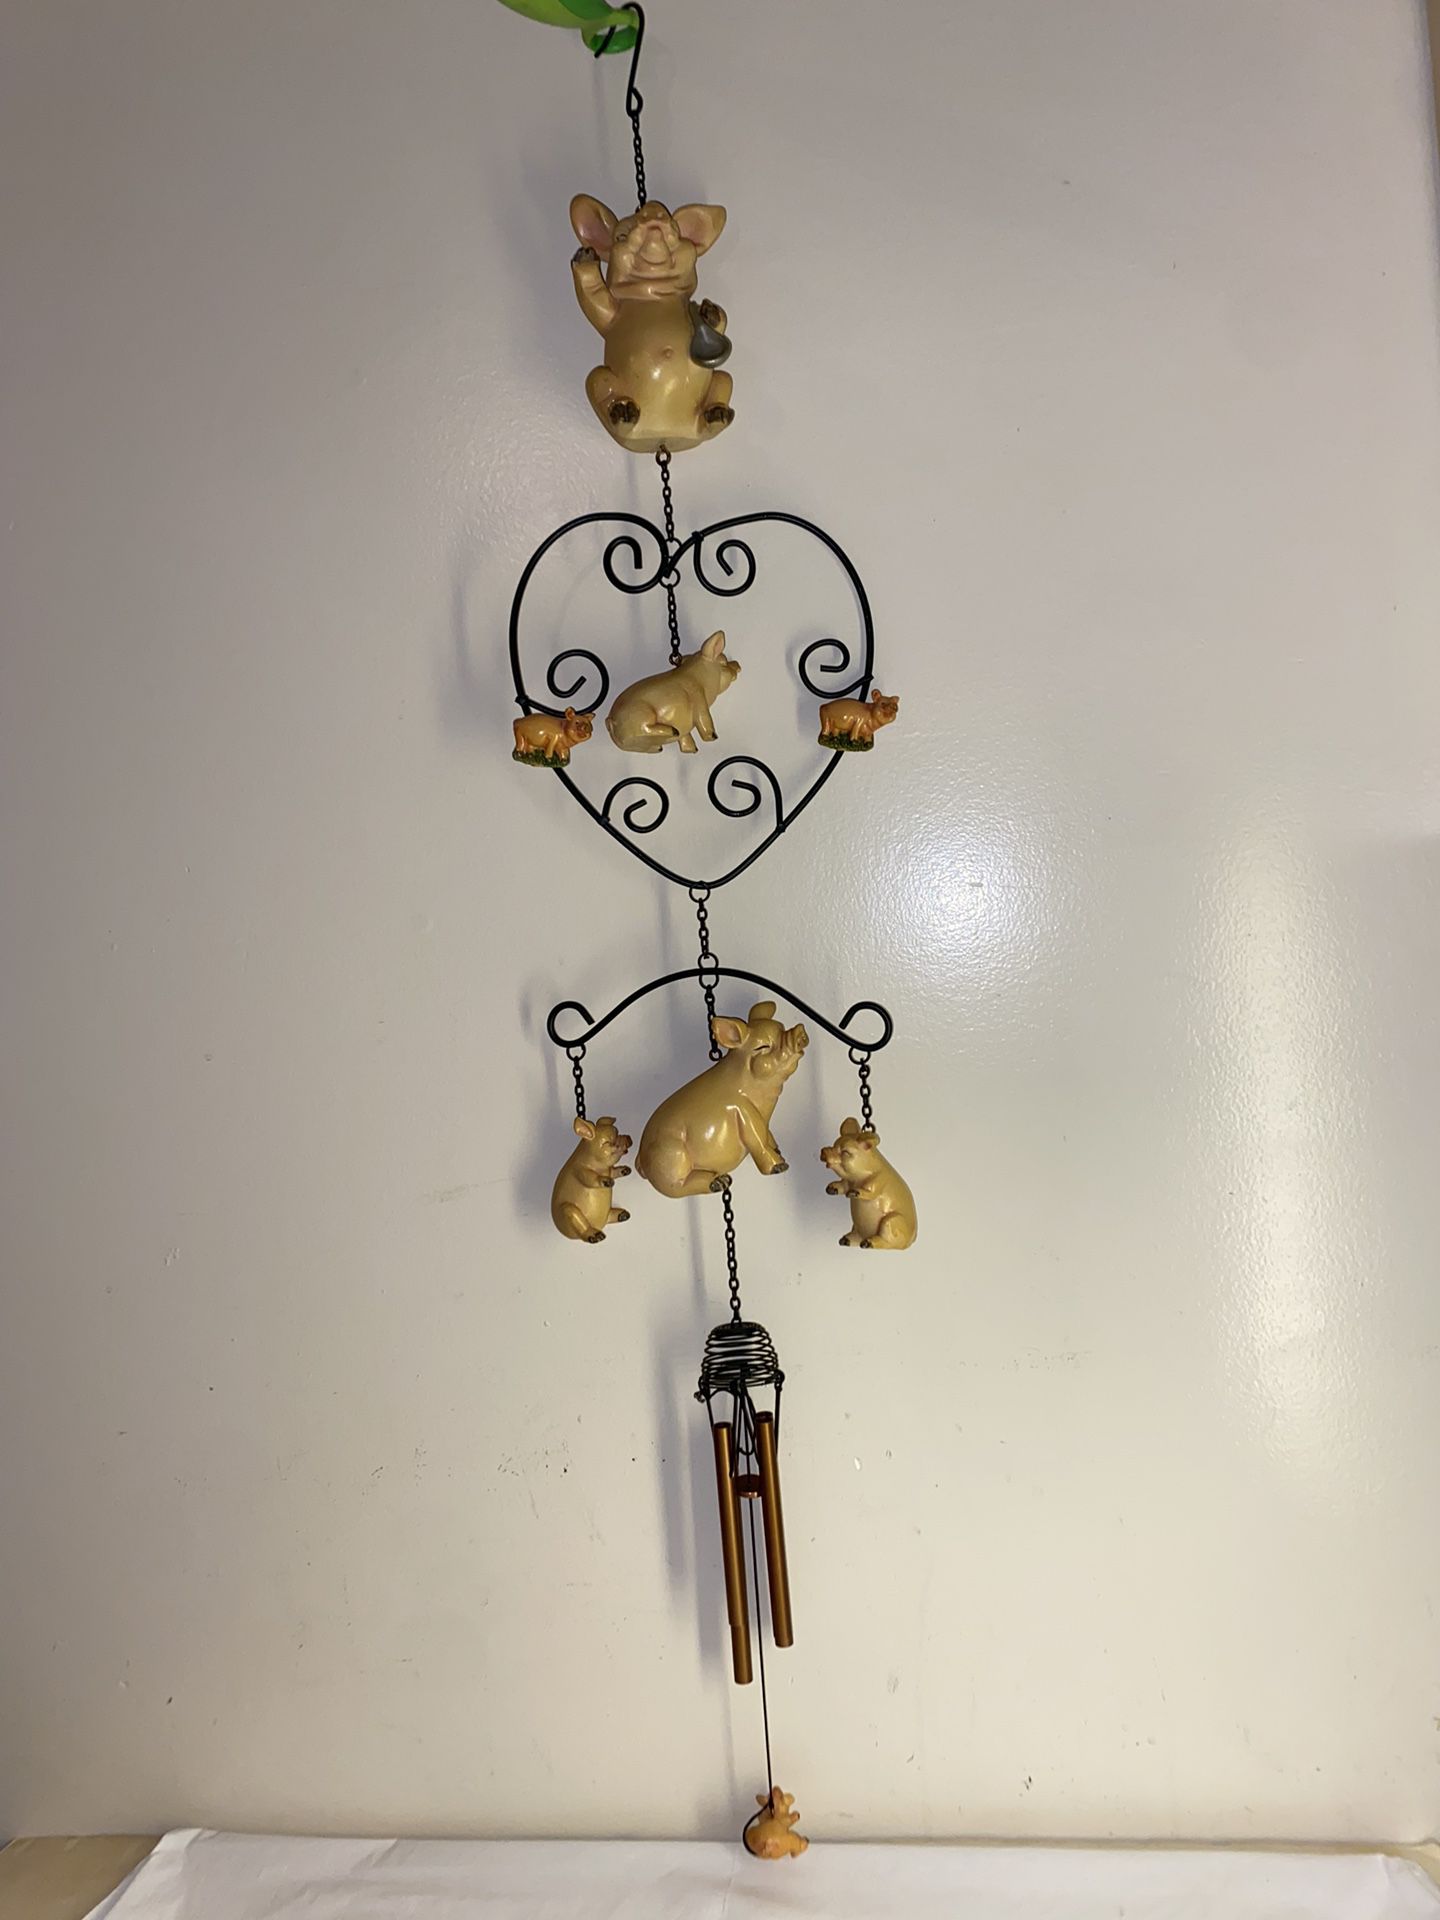 3 Ft Long Pig Wind Chime